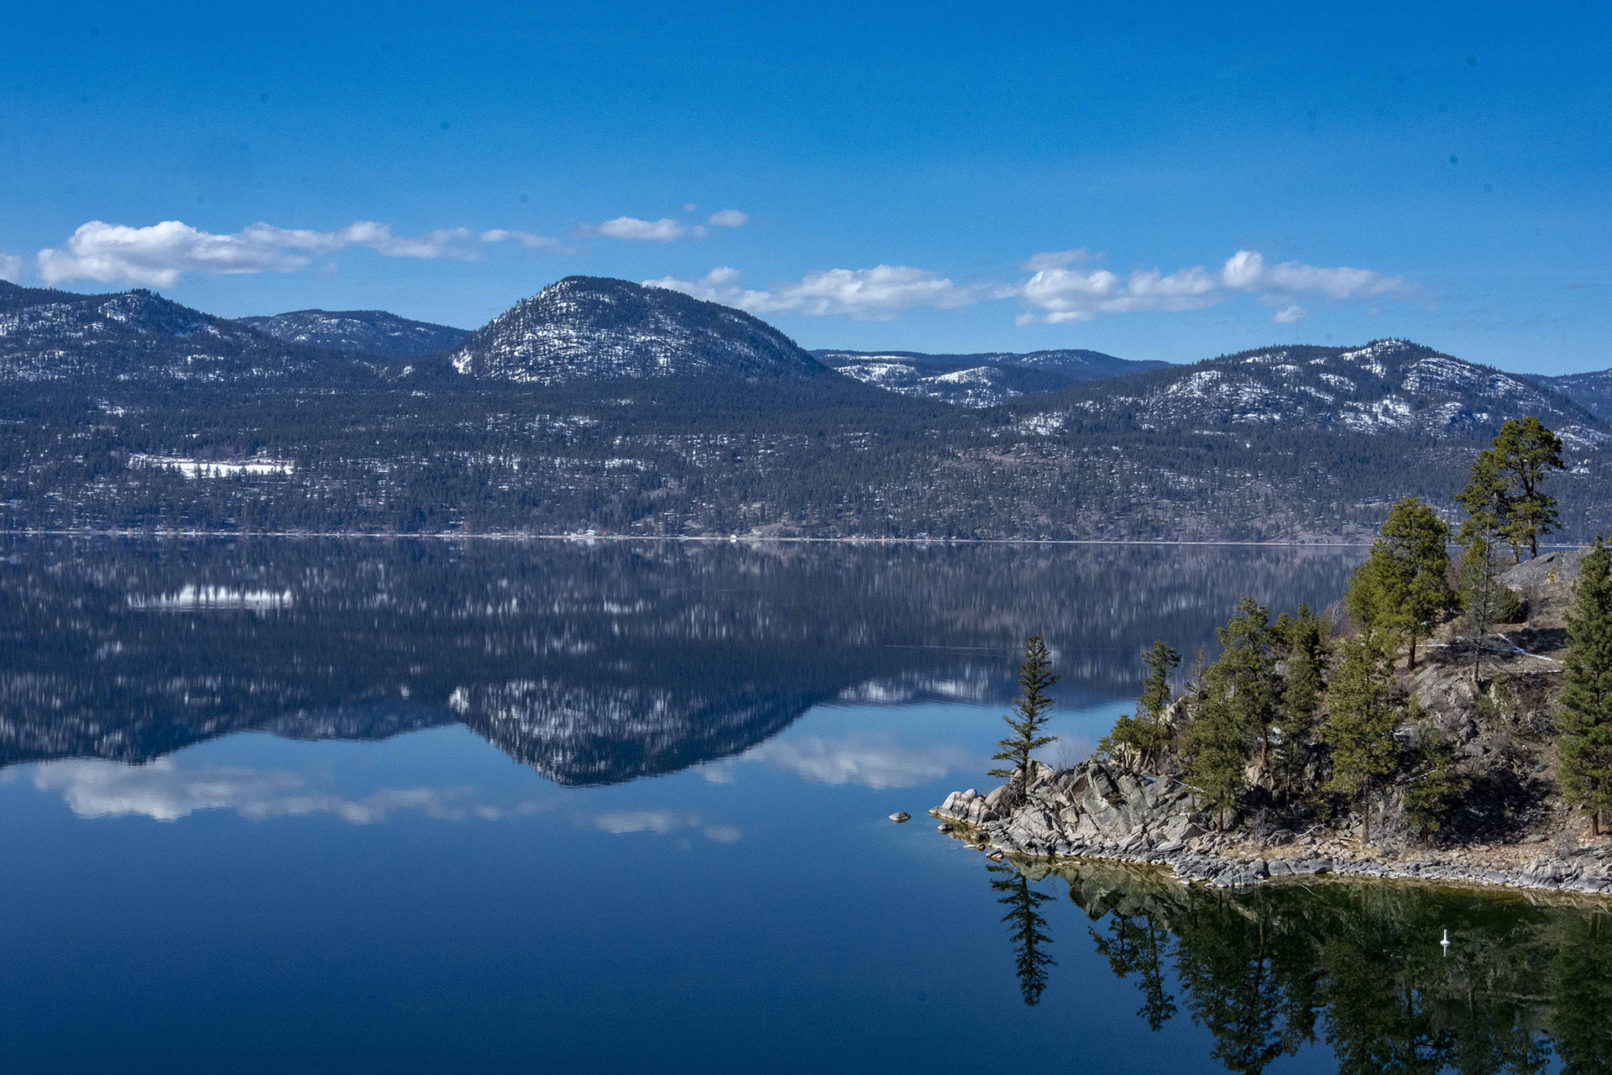 reflections on a lake during a bluebird day with a small island on the extreme right